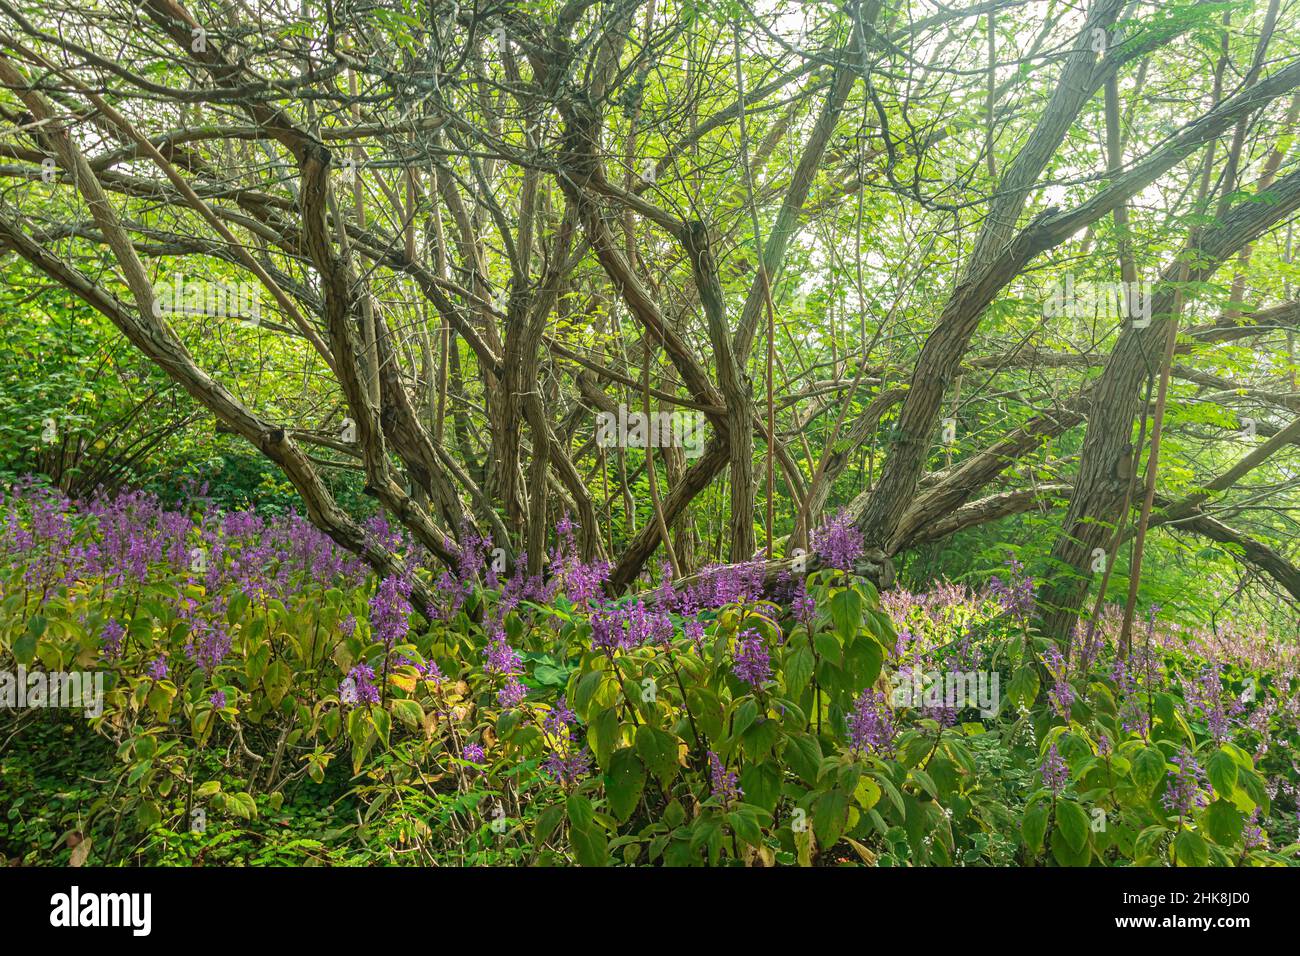 Native flowering vegetation and plants at Kirstenbosch National Botanical Garden in Cape Town, South Africa. Stock Photo